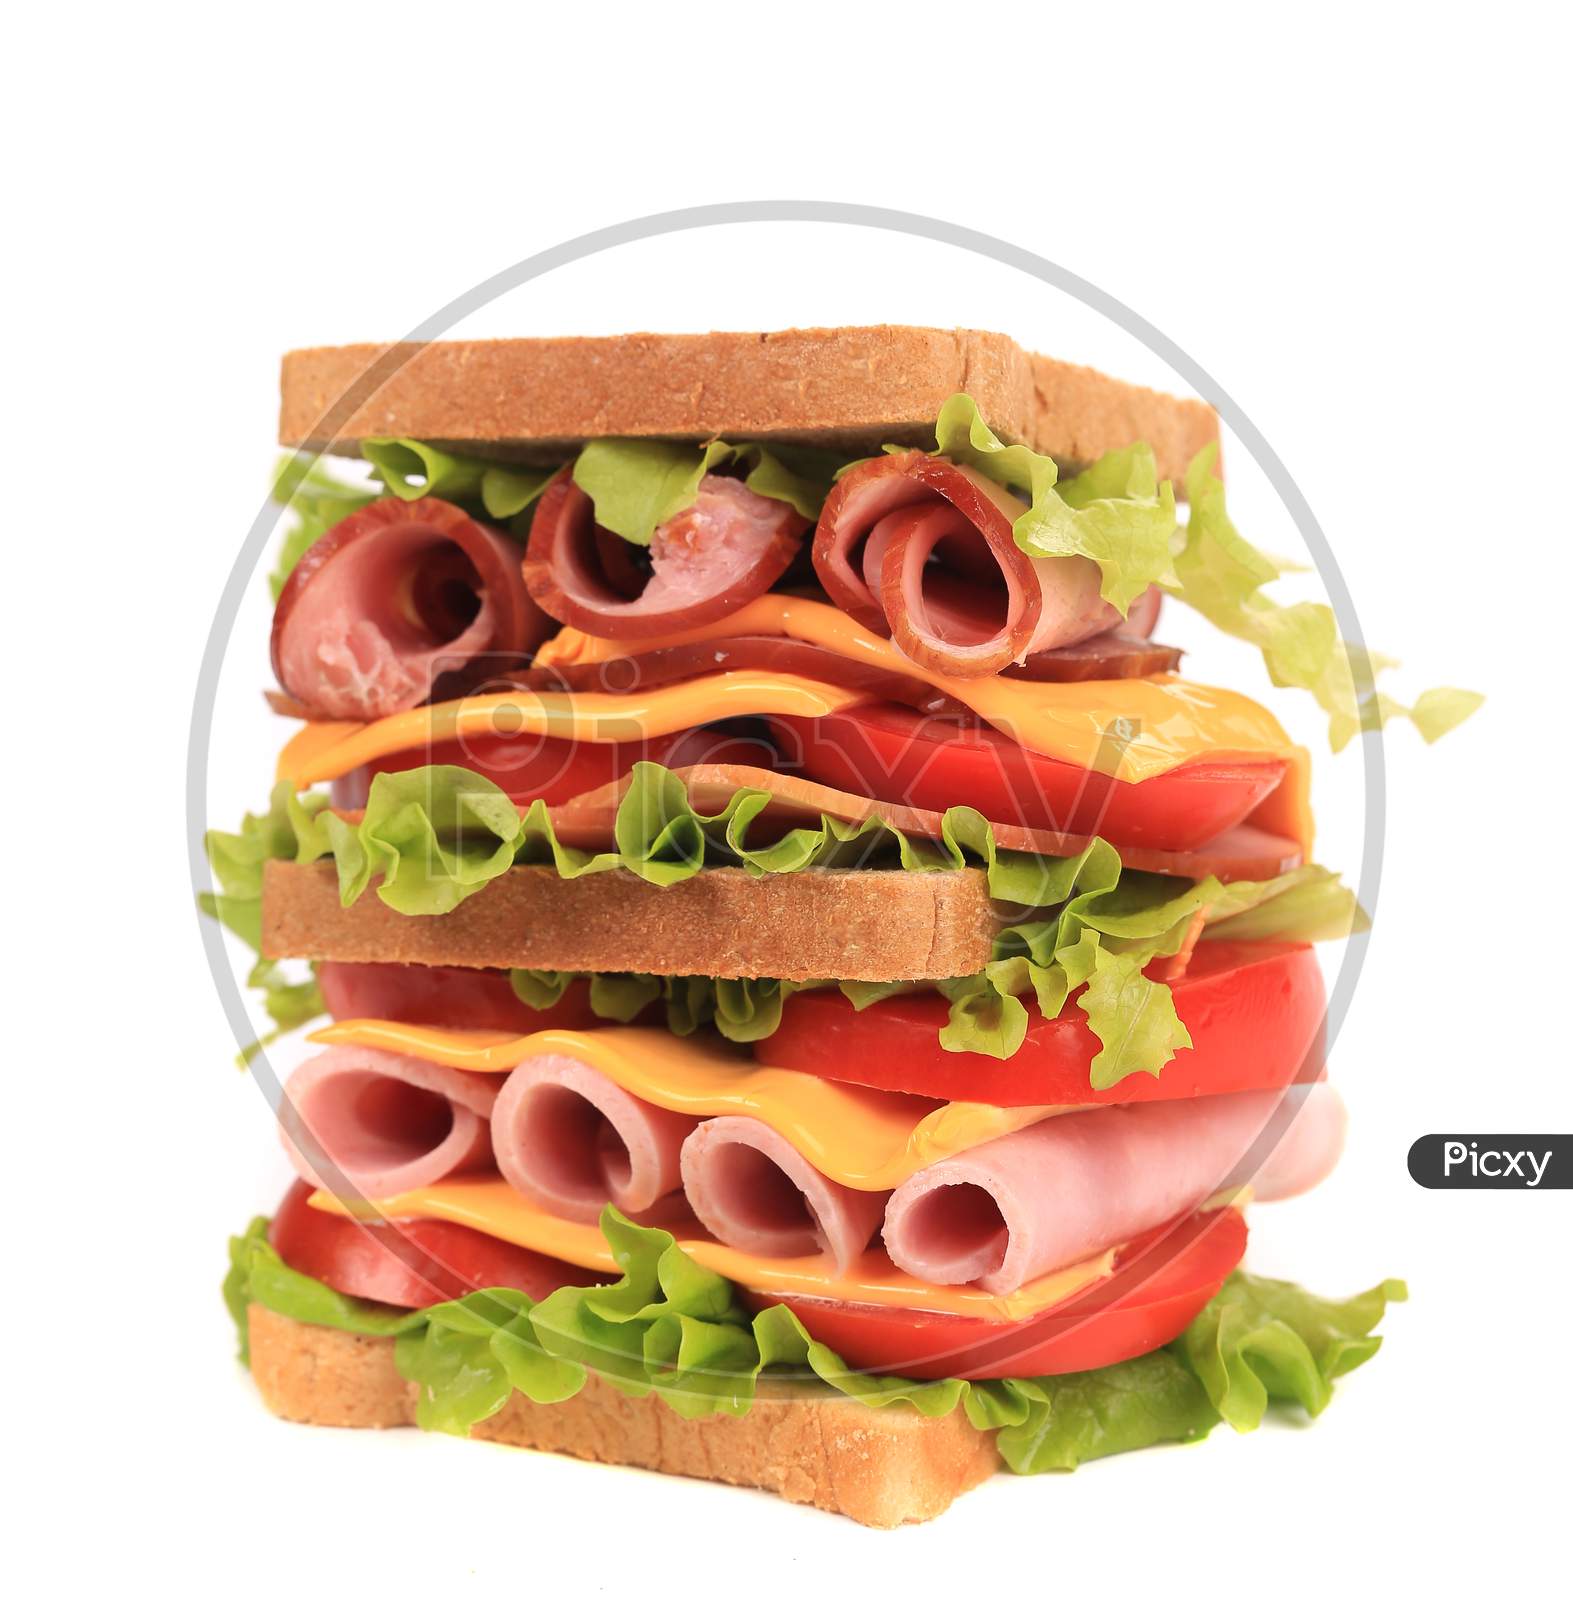 Big Sandwich With Fresh Vegetables. Isolated On A White Background.